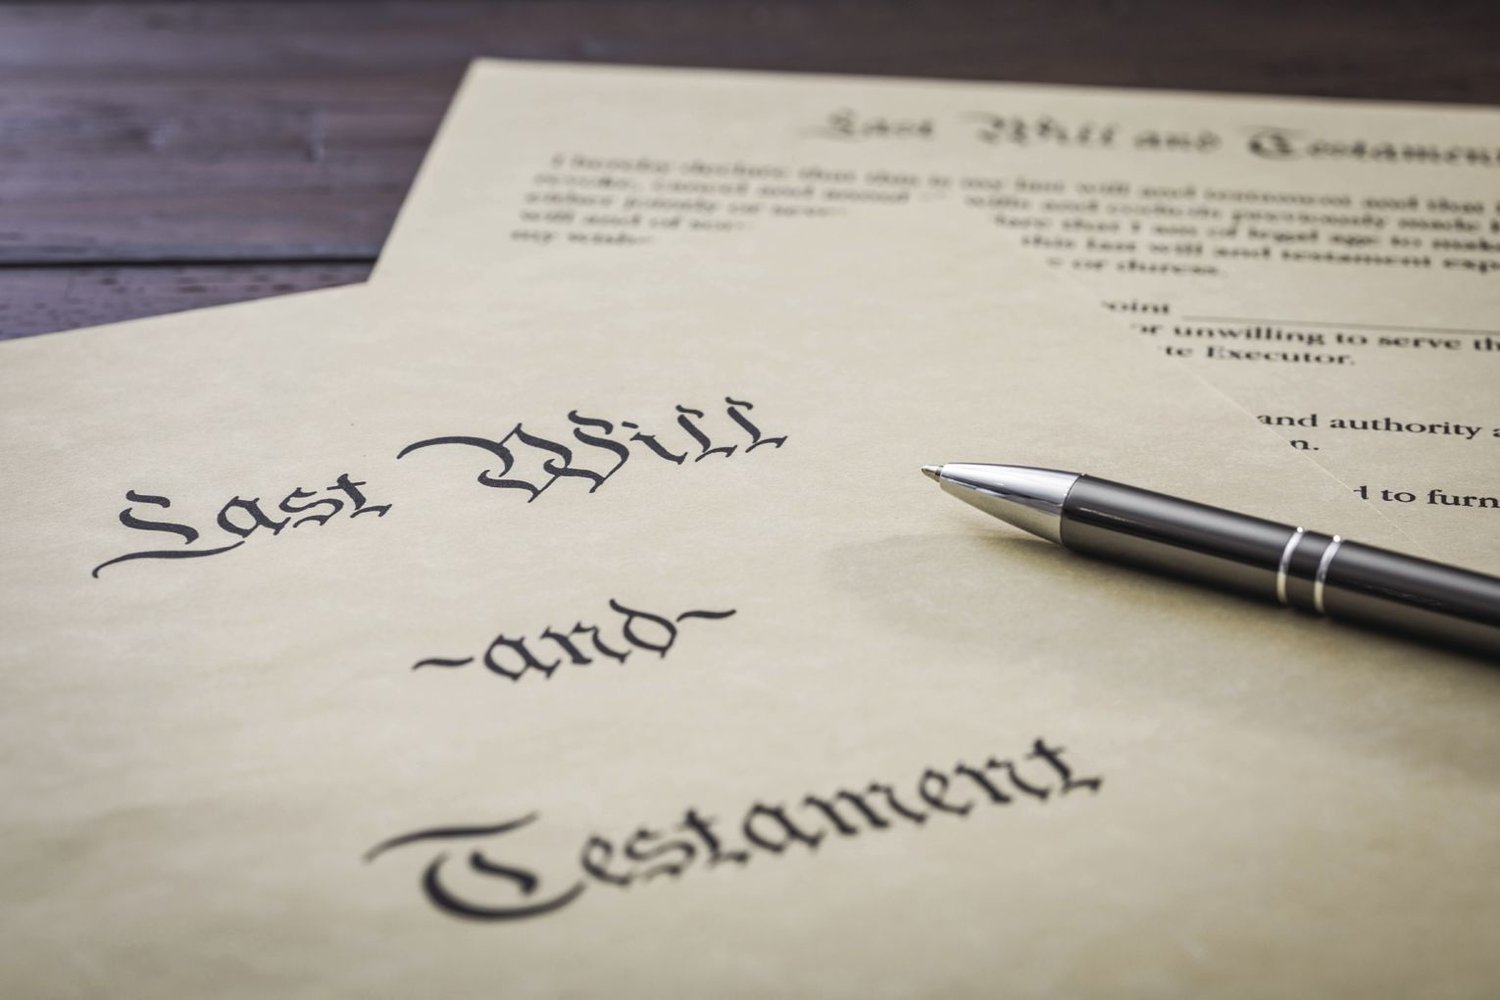 Estate planning can be tricky, which is why many people turn to attorneys to get the job done right.